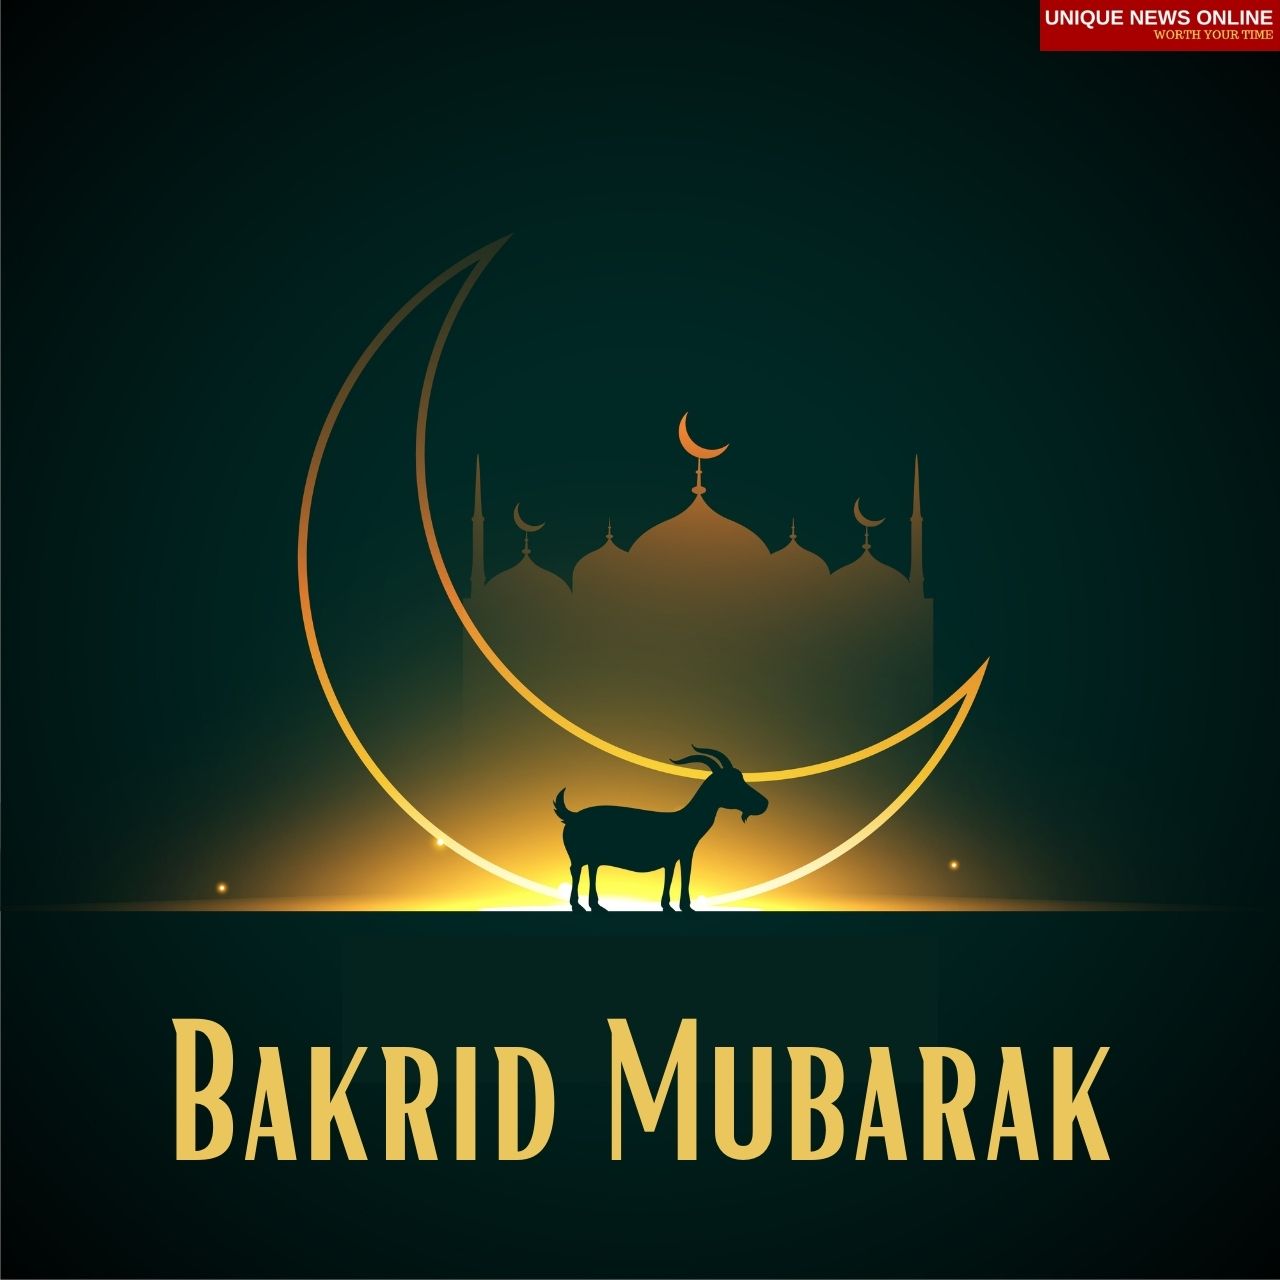 Bakrid Mubarak 2021 WhatsApp Status Video to Download to greet all your Loved Ones in one-time